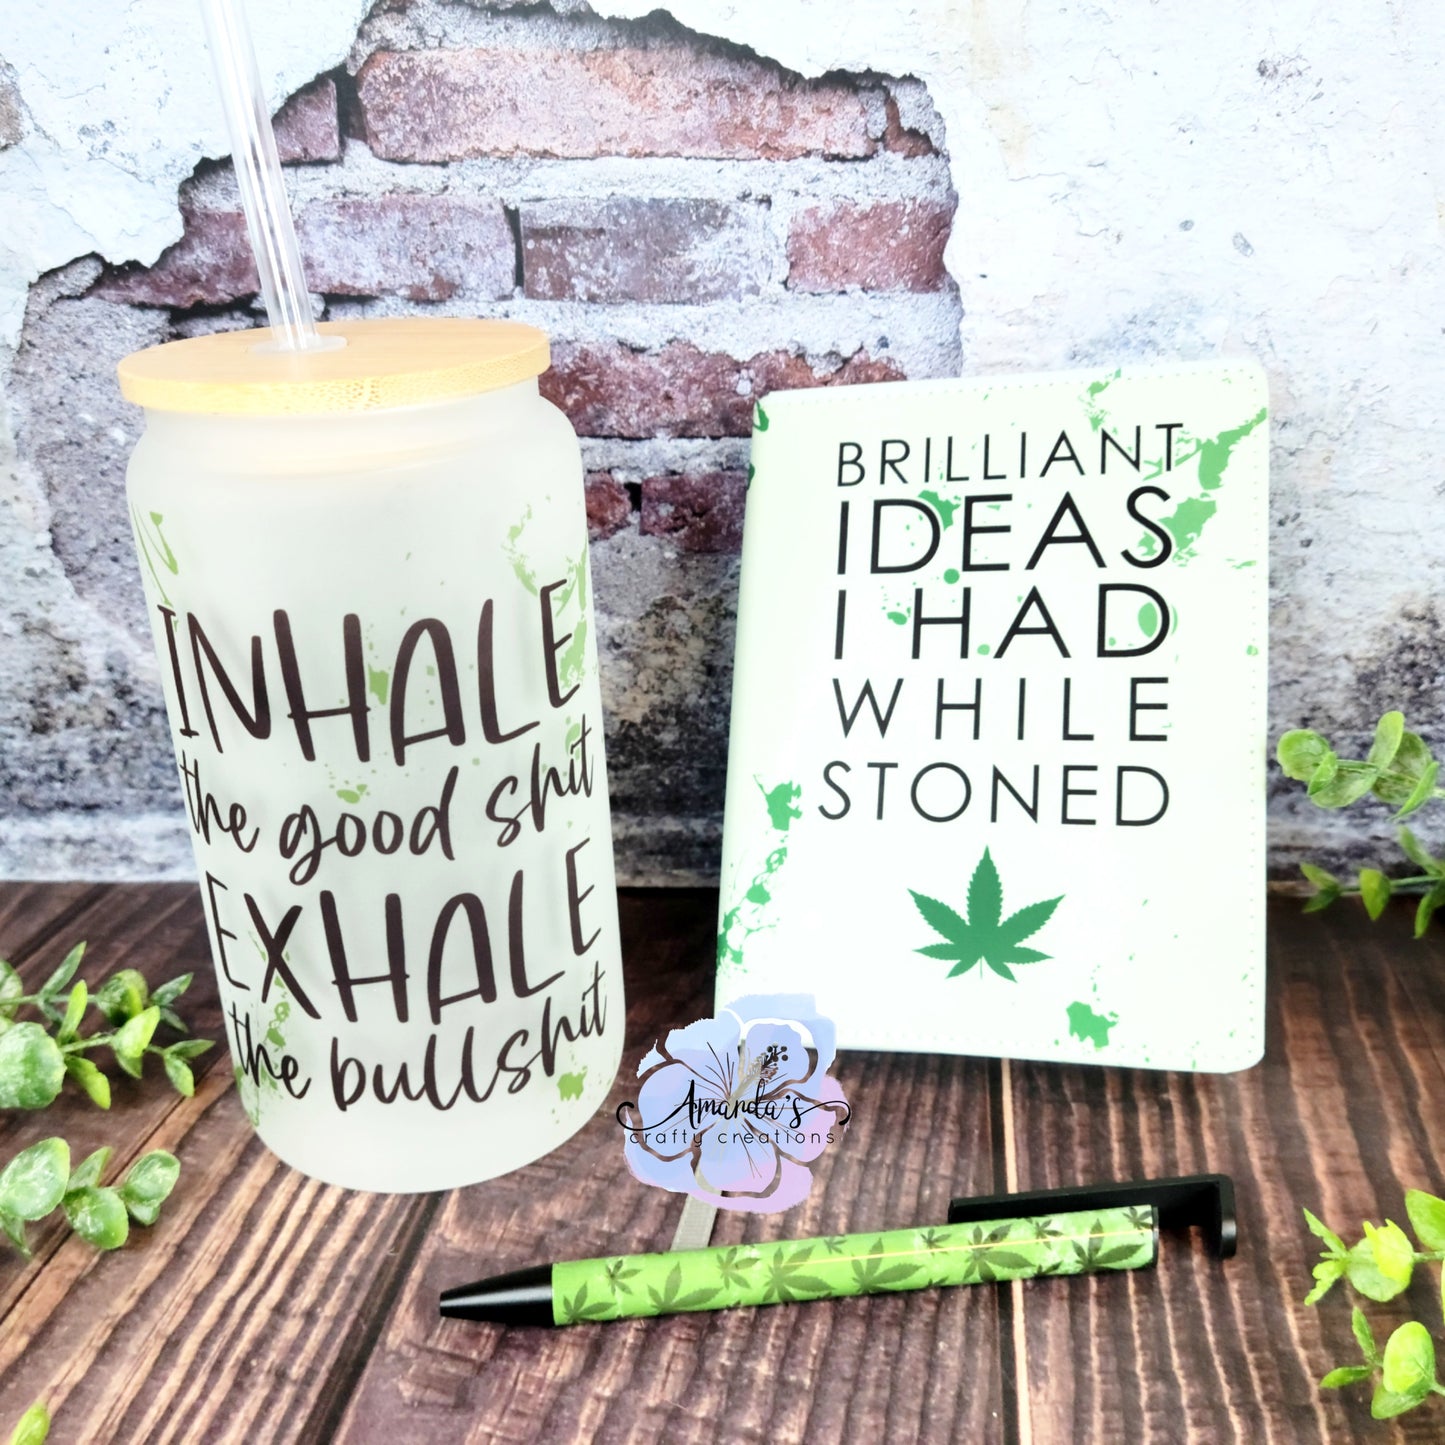 Marijuana leaf themes inhale he good shit, exhale the bullshit frosted tumbler with Brilliant Ideas I had while I was stoned journal and matching pen